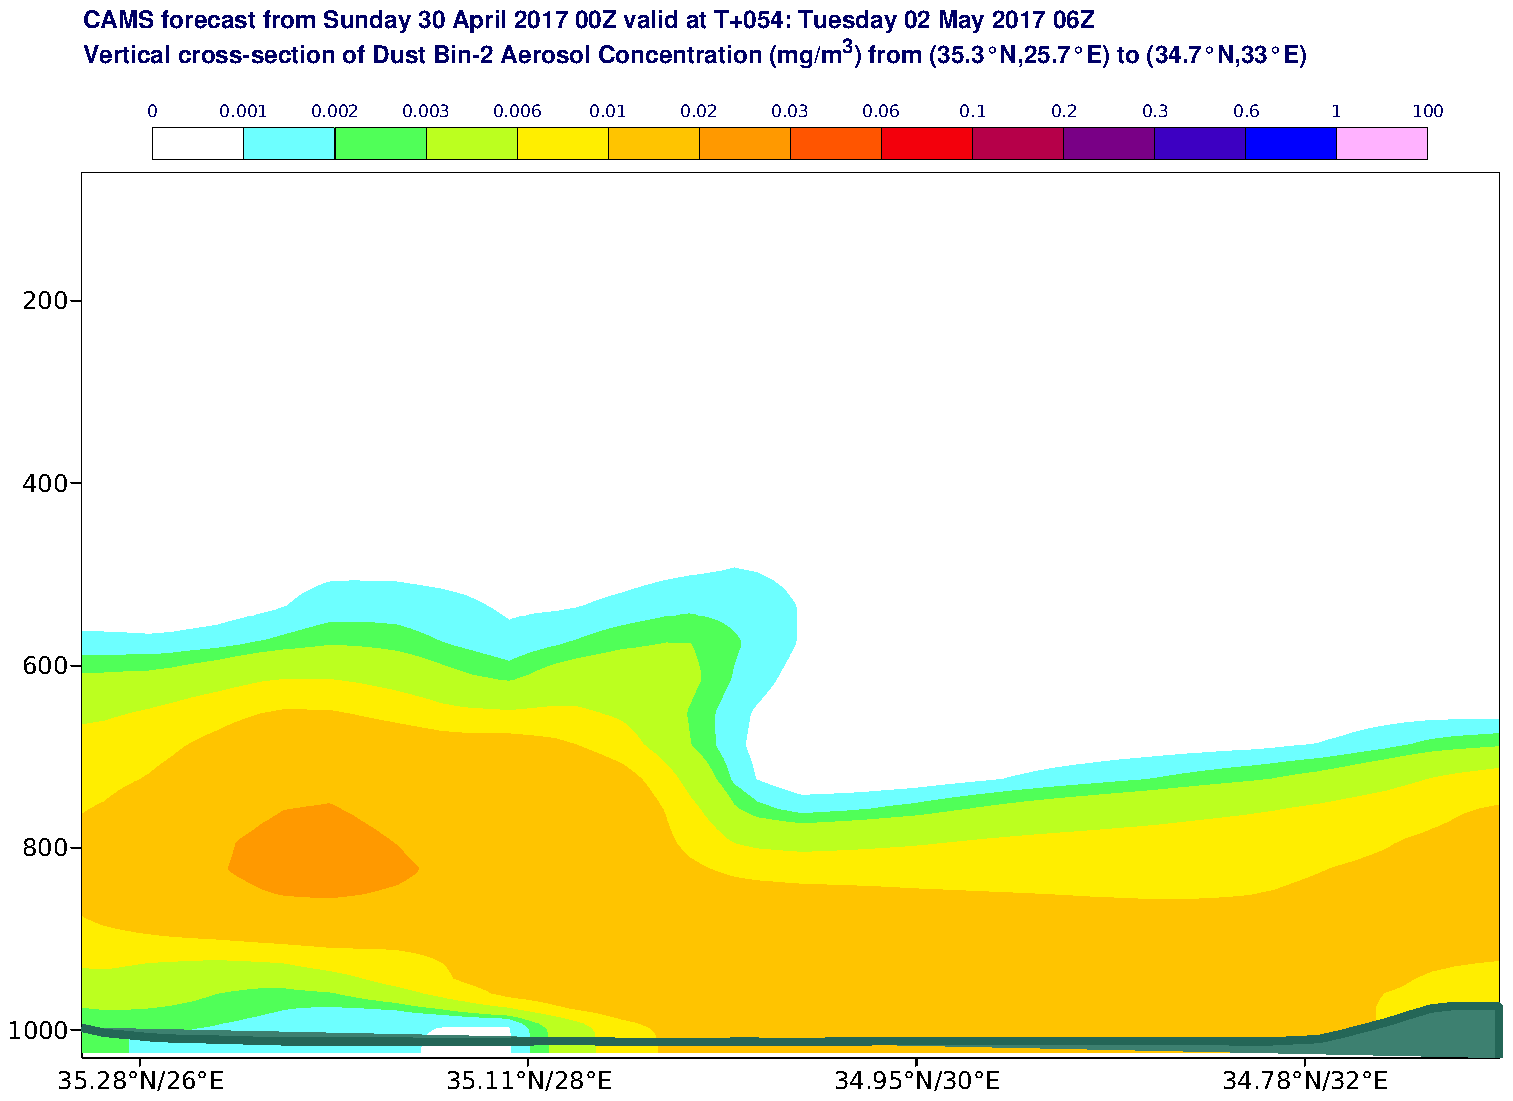 Vertical cross-section of Dust Bin-2 Aerosol Concentration (mg/m3) valid at T54 - 2017-05-02 06:00